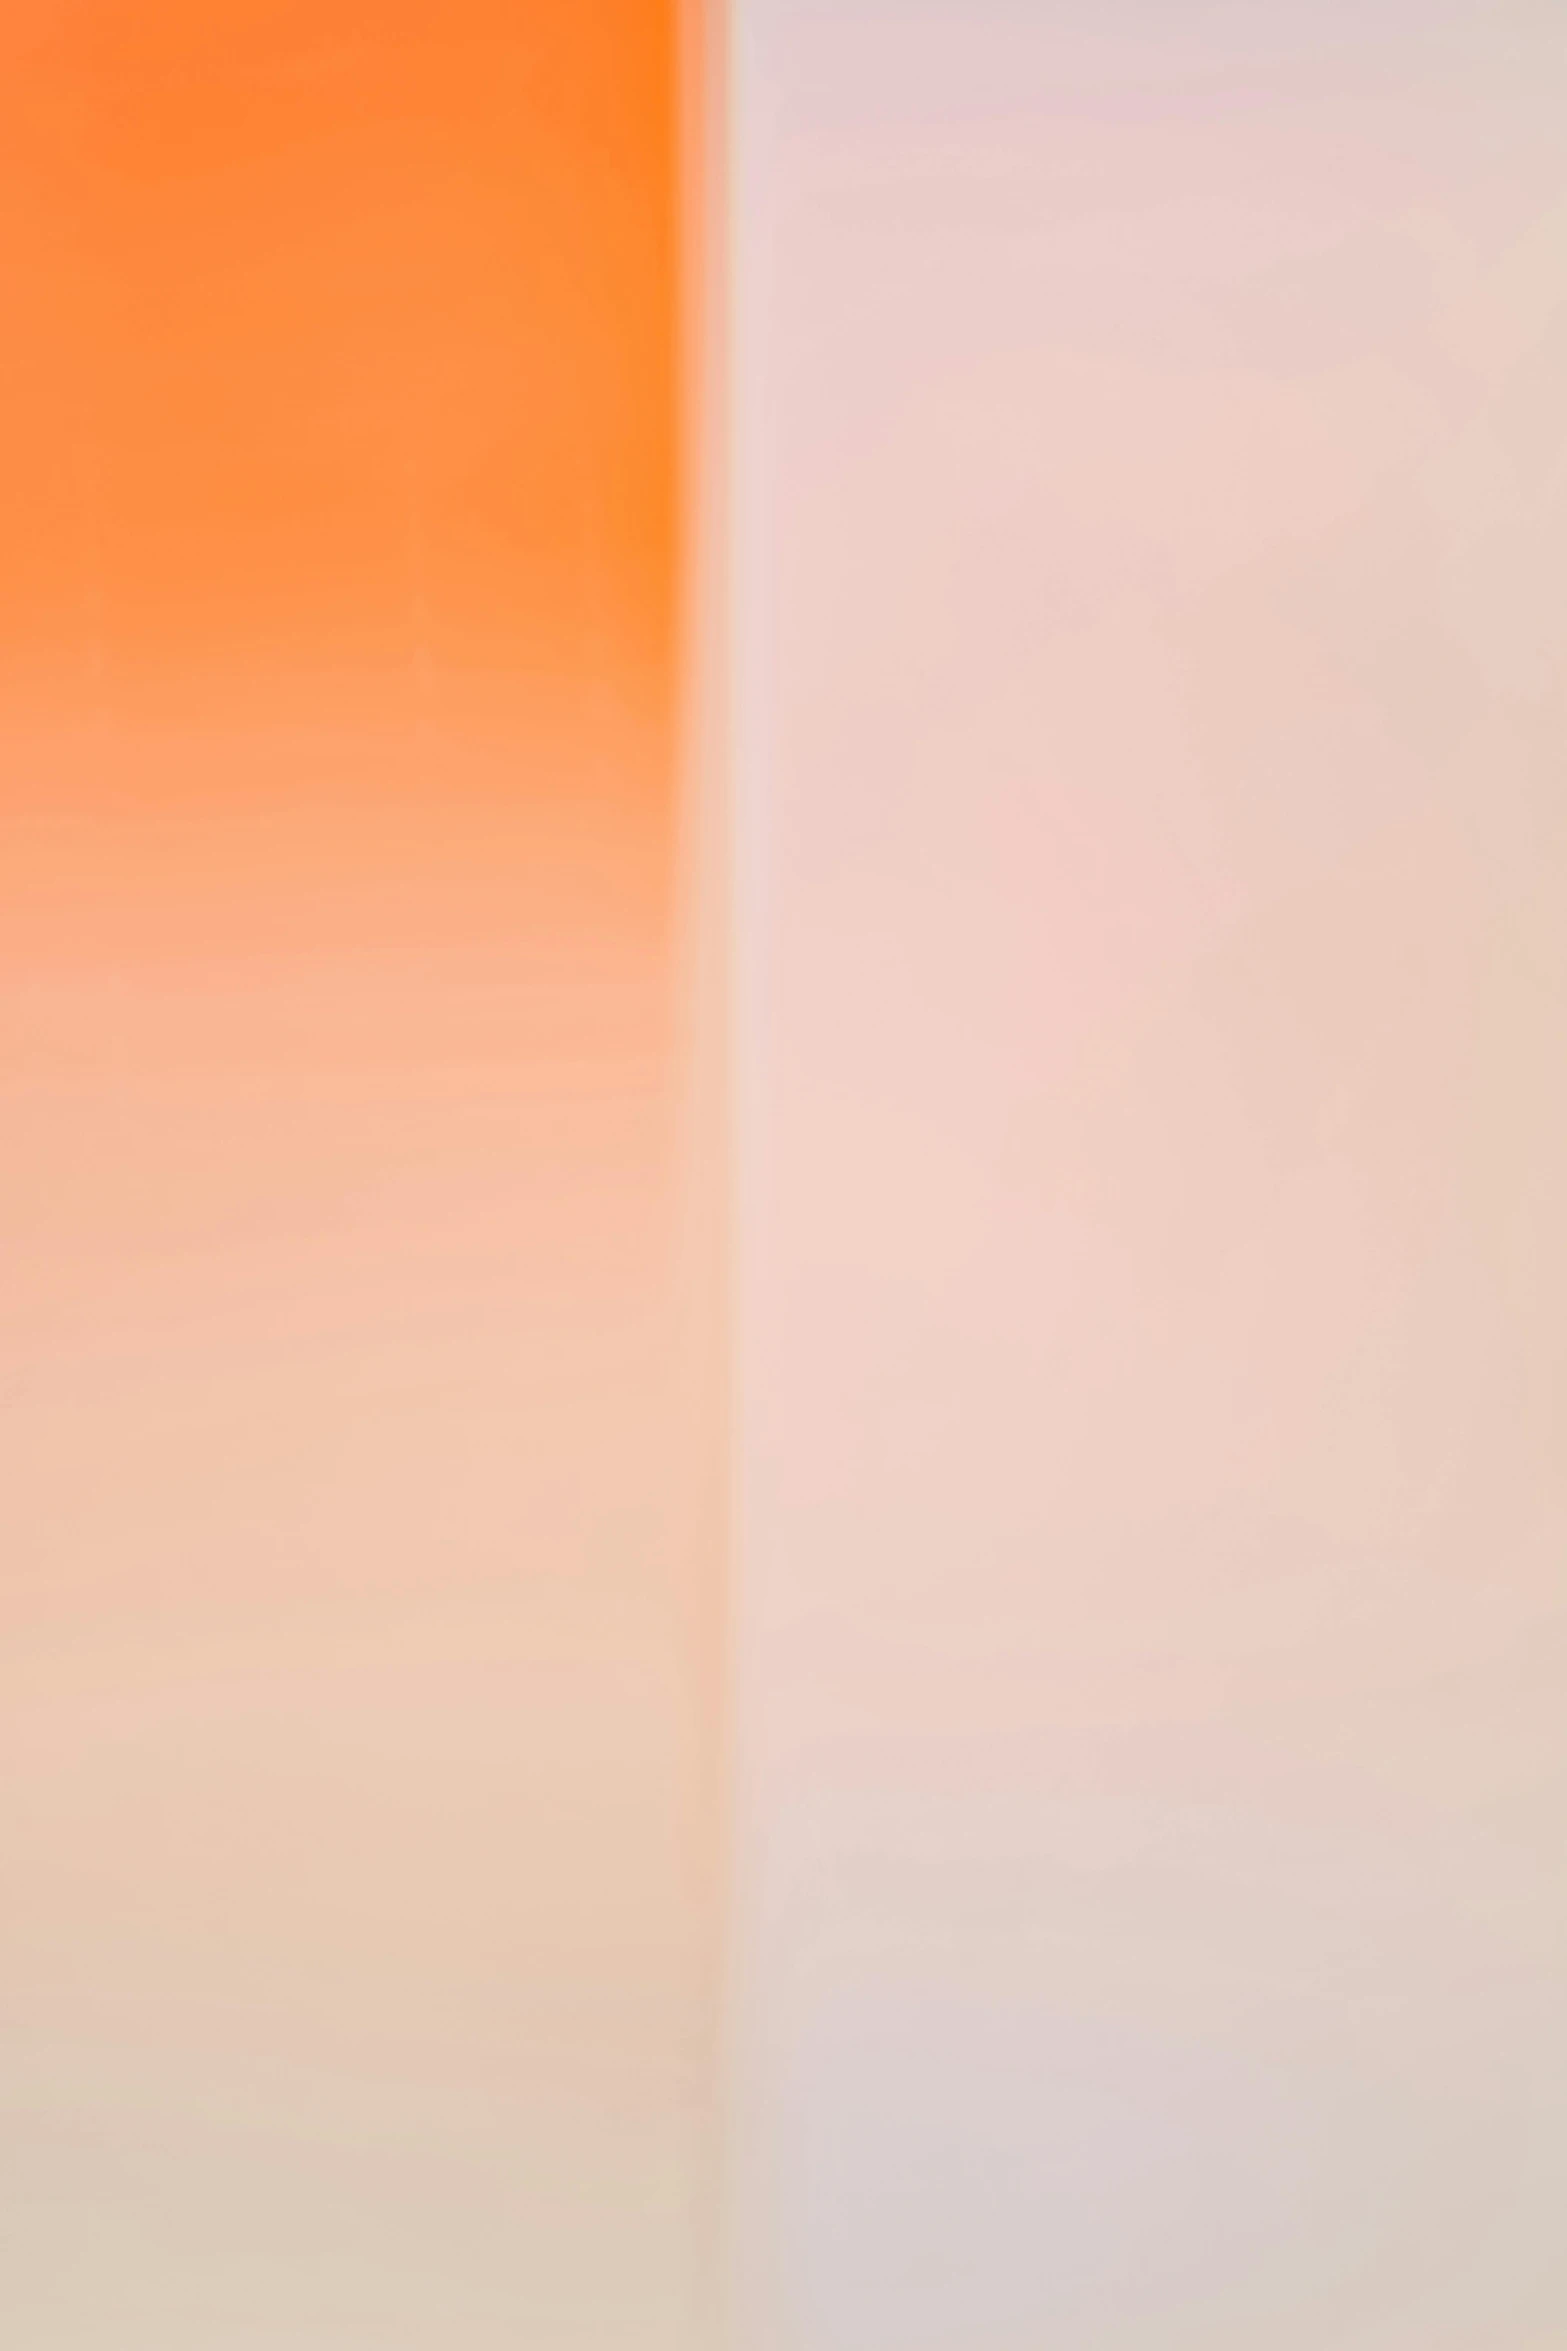 a white toilet sitting in a bathroom next to a wall, a picture, inspired by Barnett Newman, unsplash, color field, gradient orange, blurred detail, 2011, refracted sunset